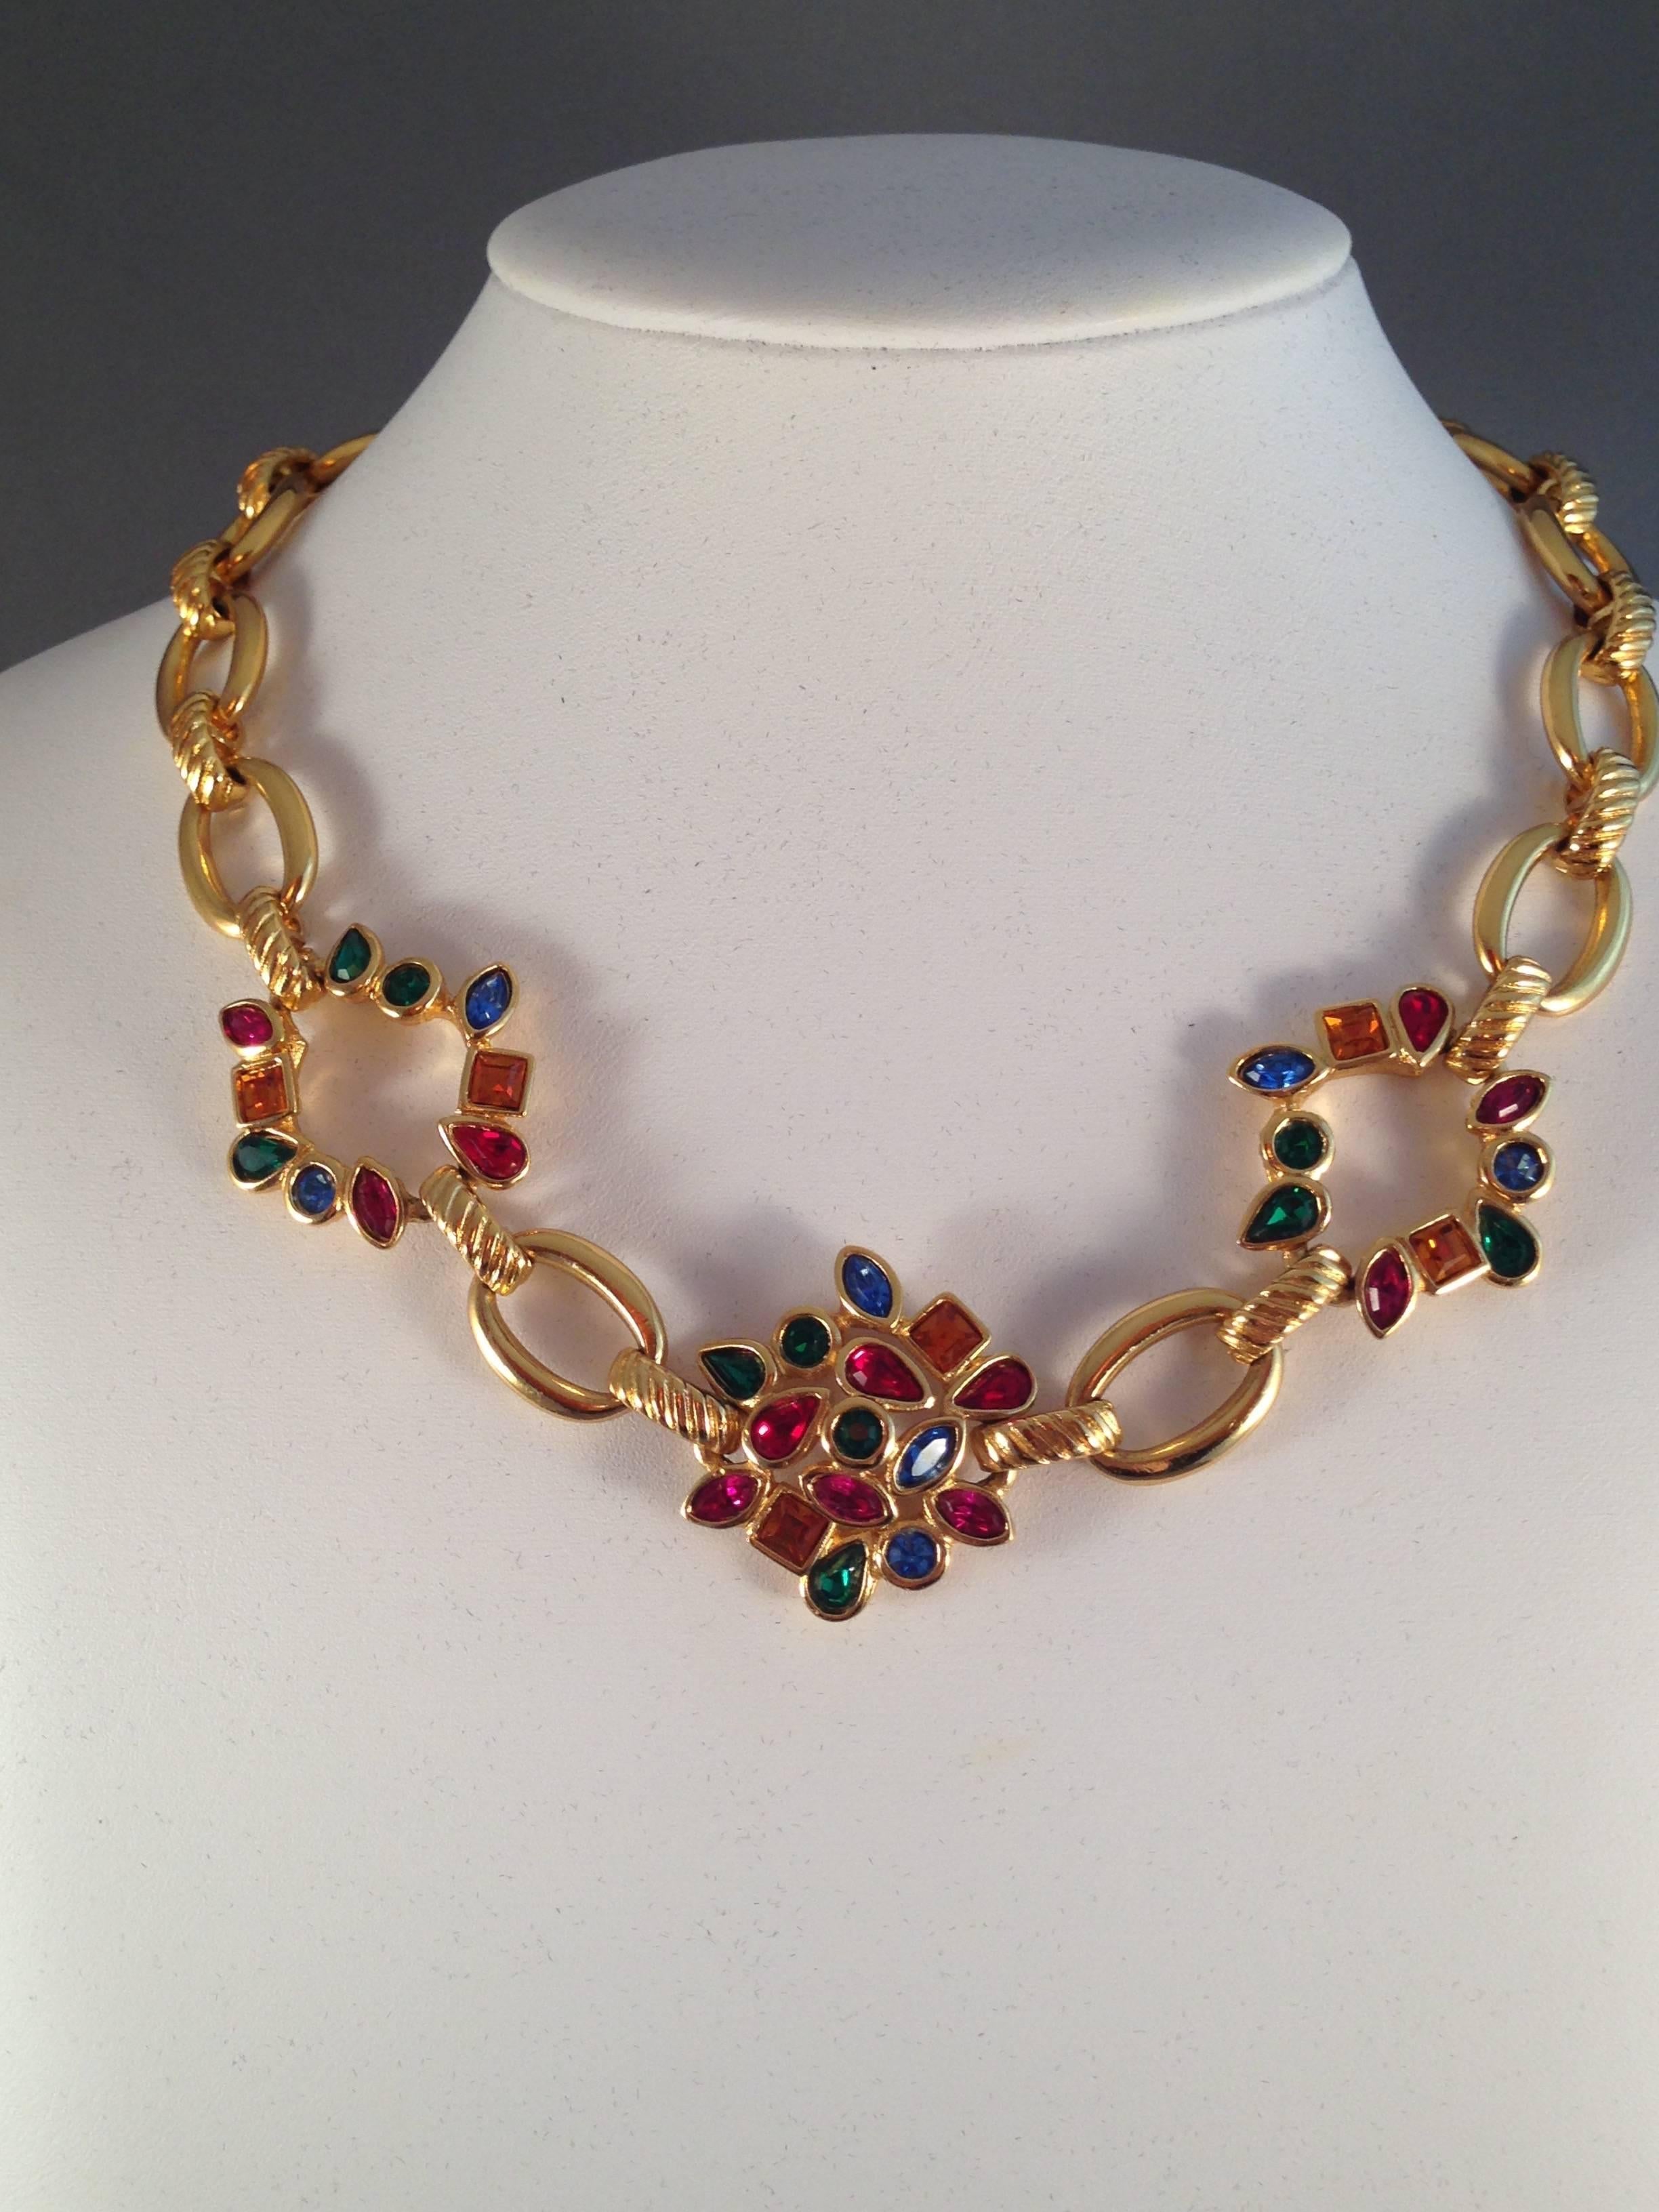 This is a 1980s Yves Saint Laurent gold-tone necklace set with beautiful, sparkling, multi-colored glass stones. It measures 17" long and 1 1/4" at its widest point. The necklace closes with a clasp that is marked 'YSL Made in France' on